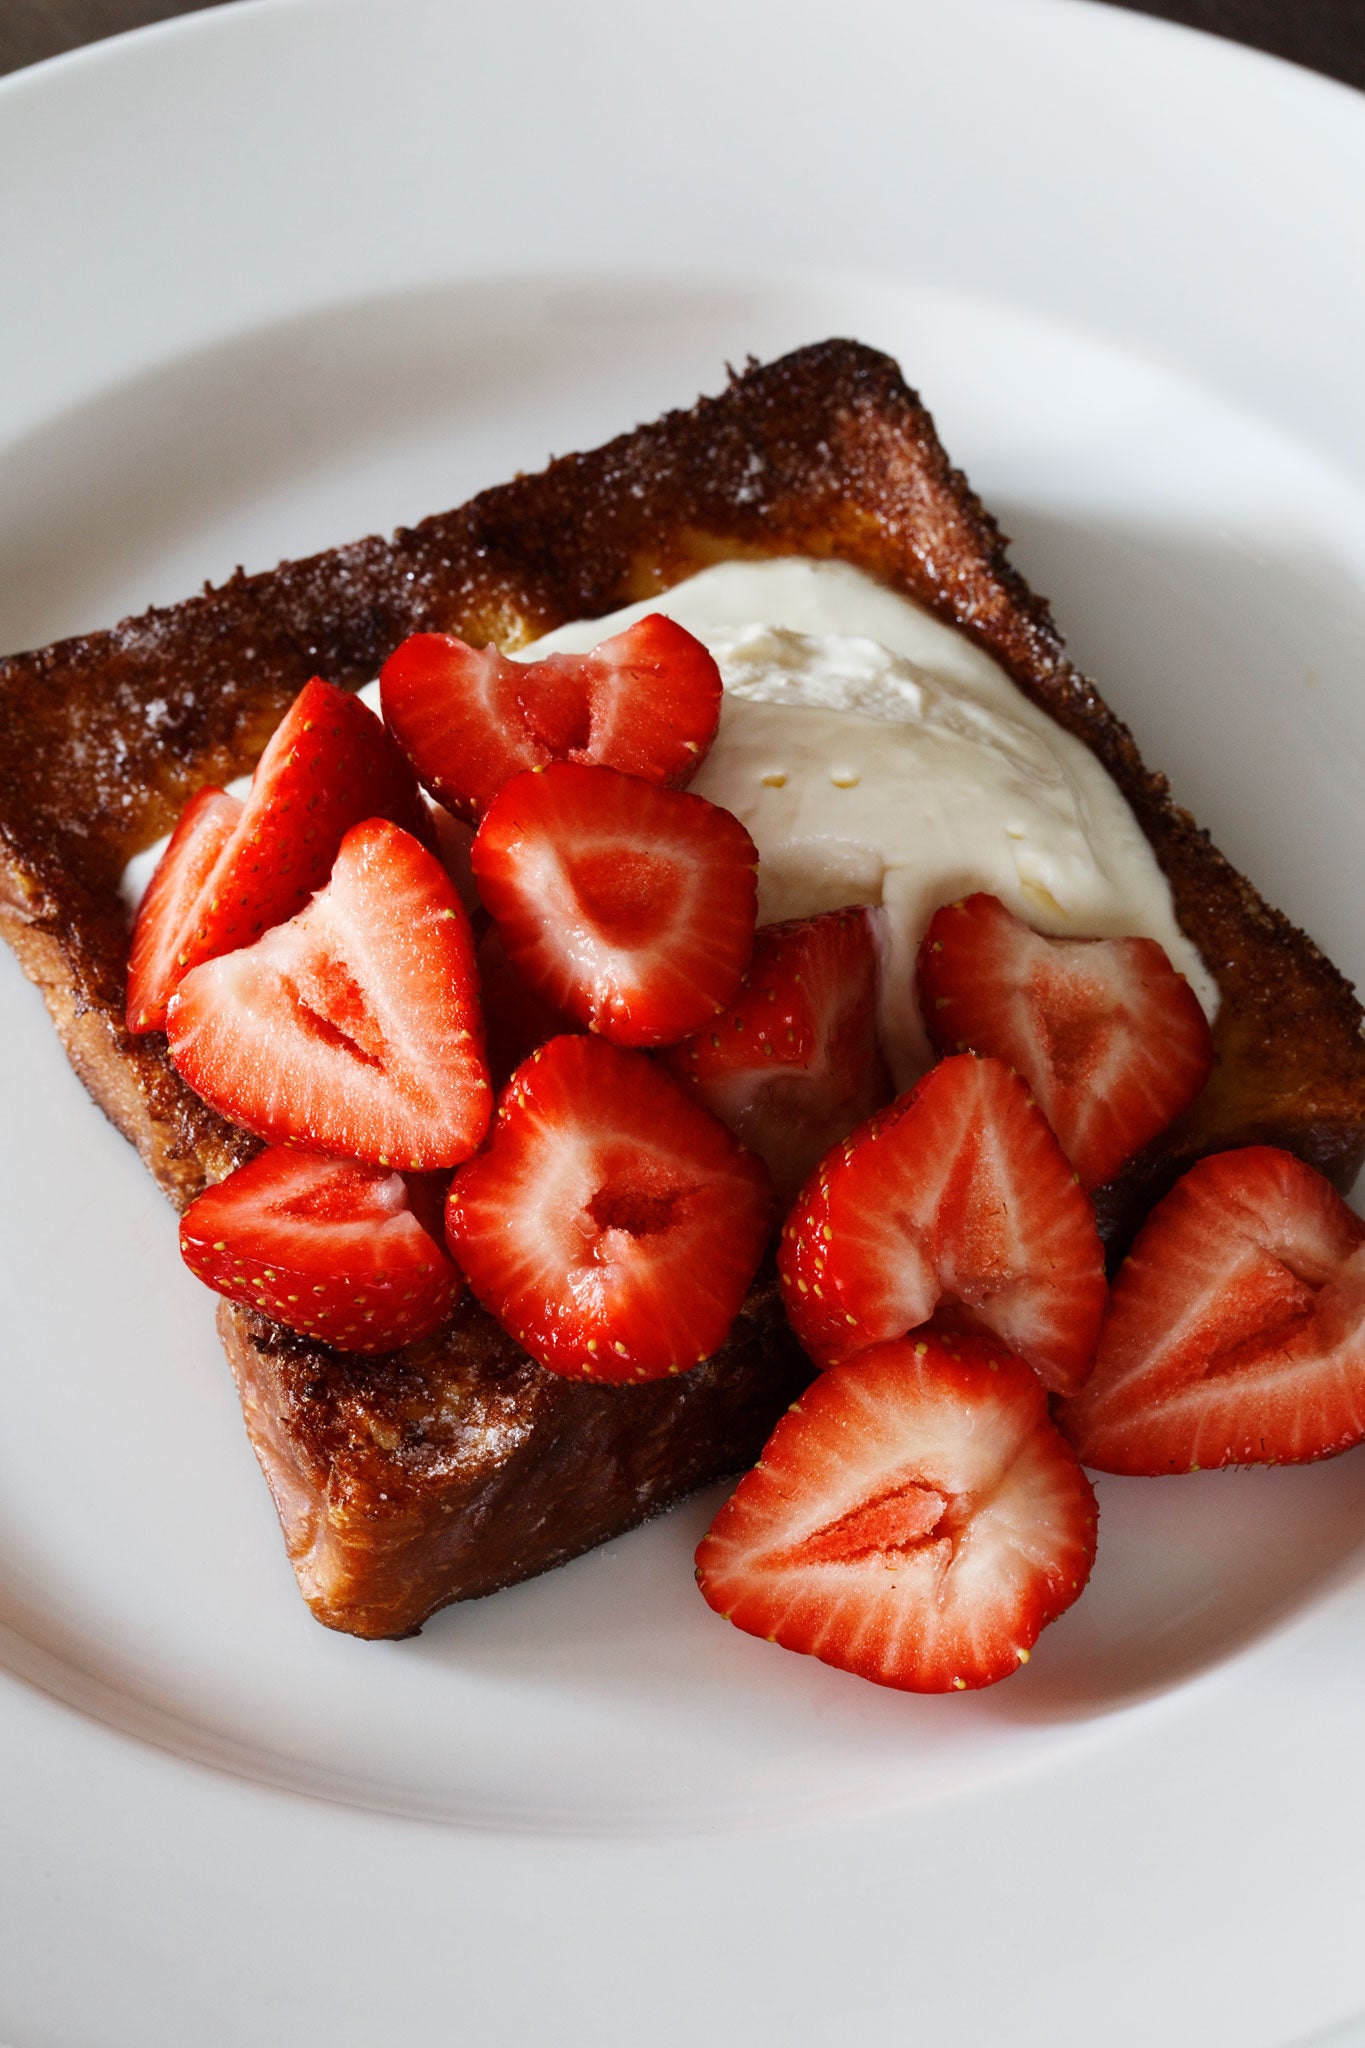 French toast with strawberries makes a great brunch